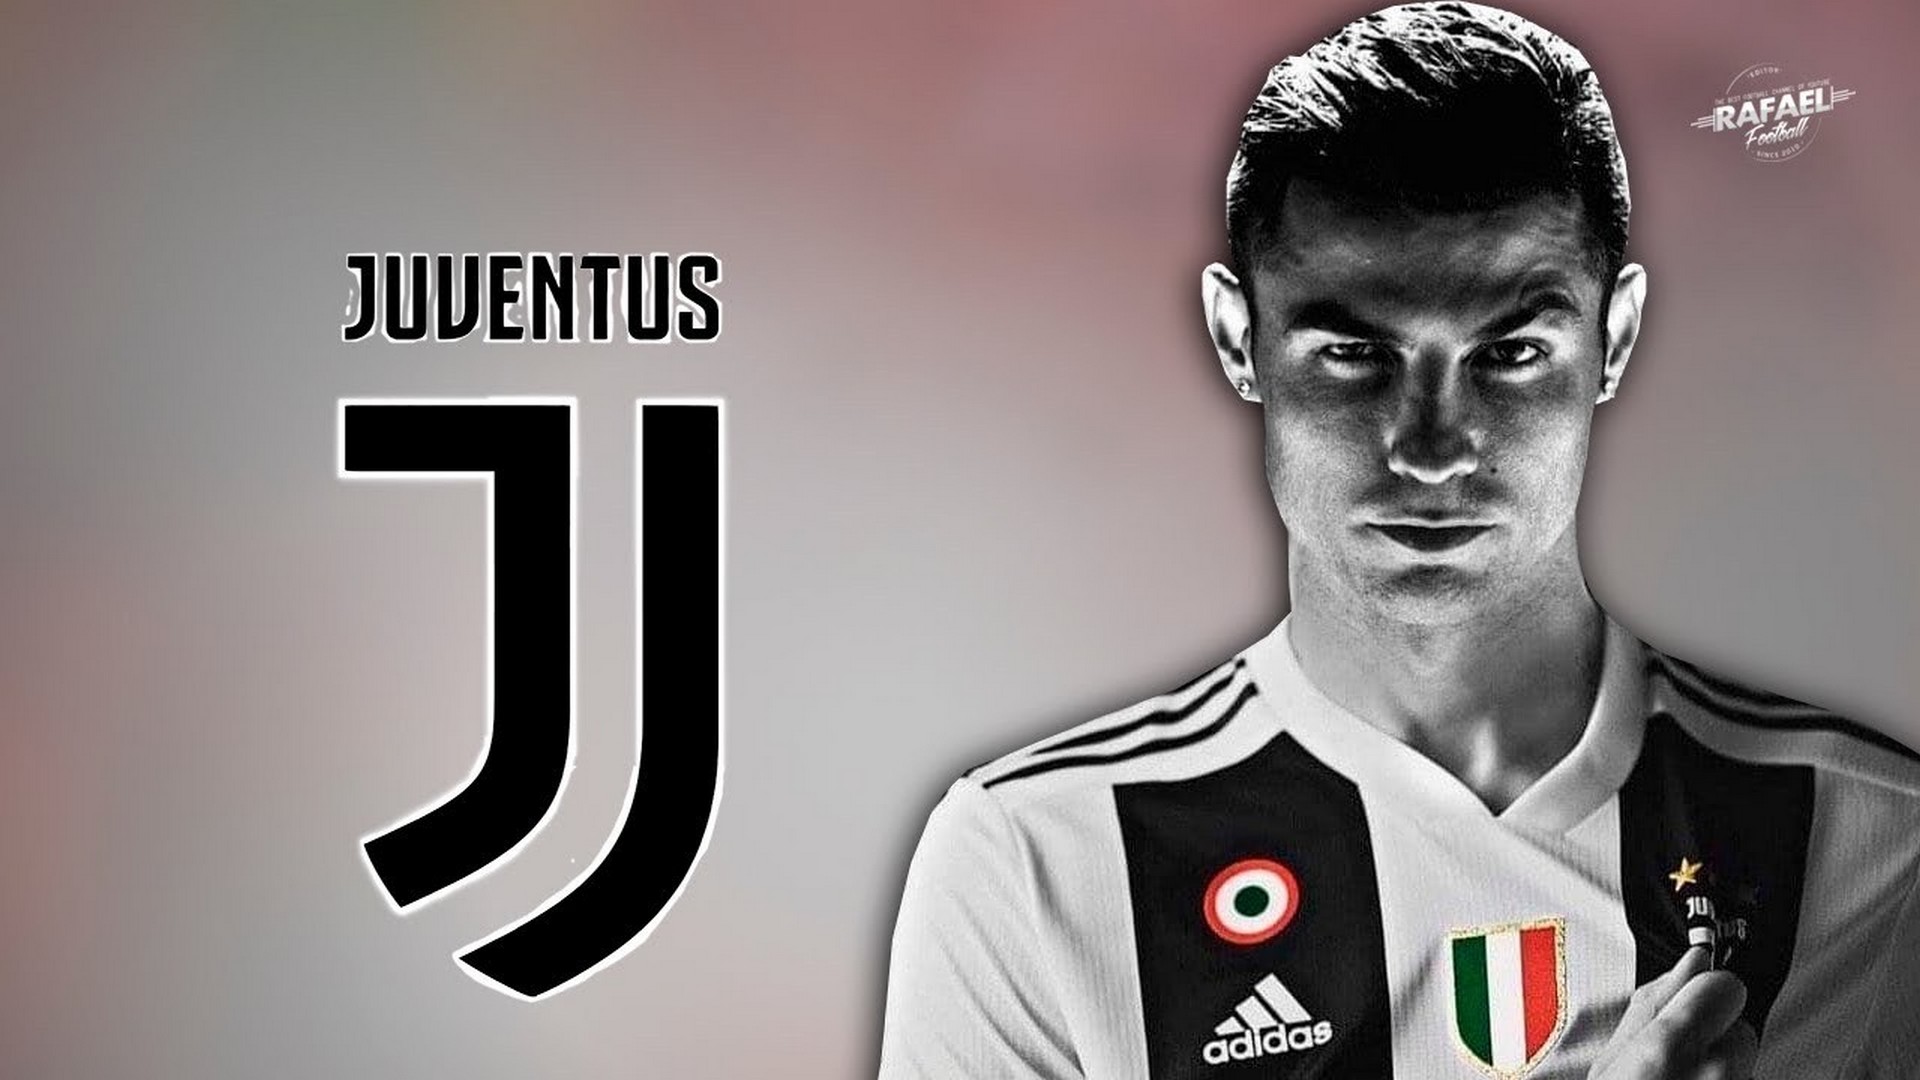 Wallpaper Cristiano Ronaldo Juventus HD with image resolution 1920x1080 pixel. You can make this wallpaper for your Desktop Computer Backgrounds, Mac Wallpapers, Android Lock screen or iPhone Screensavers